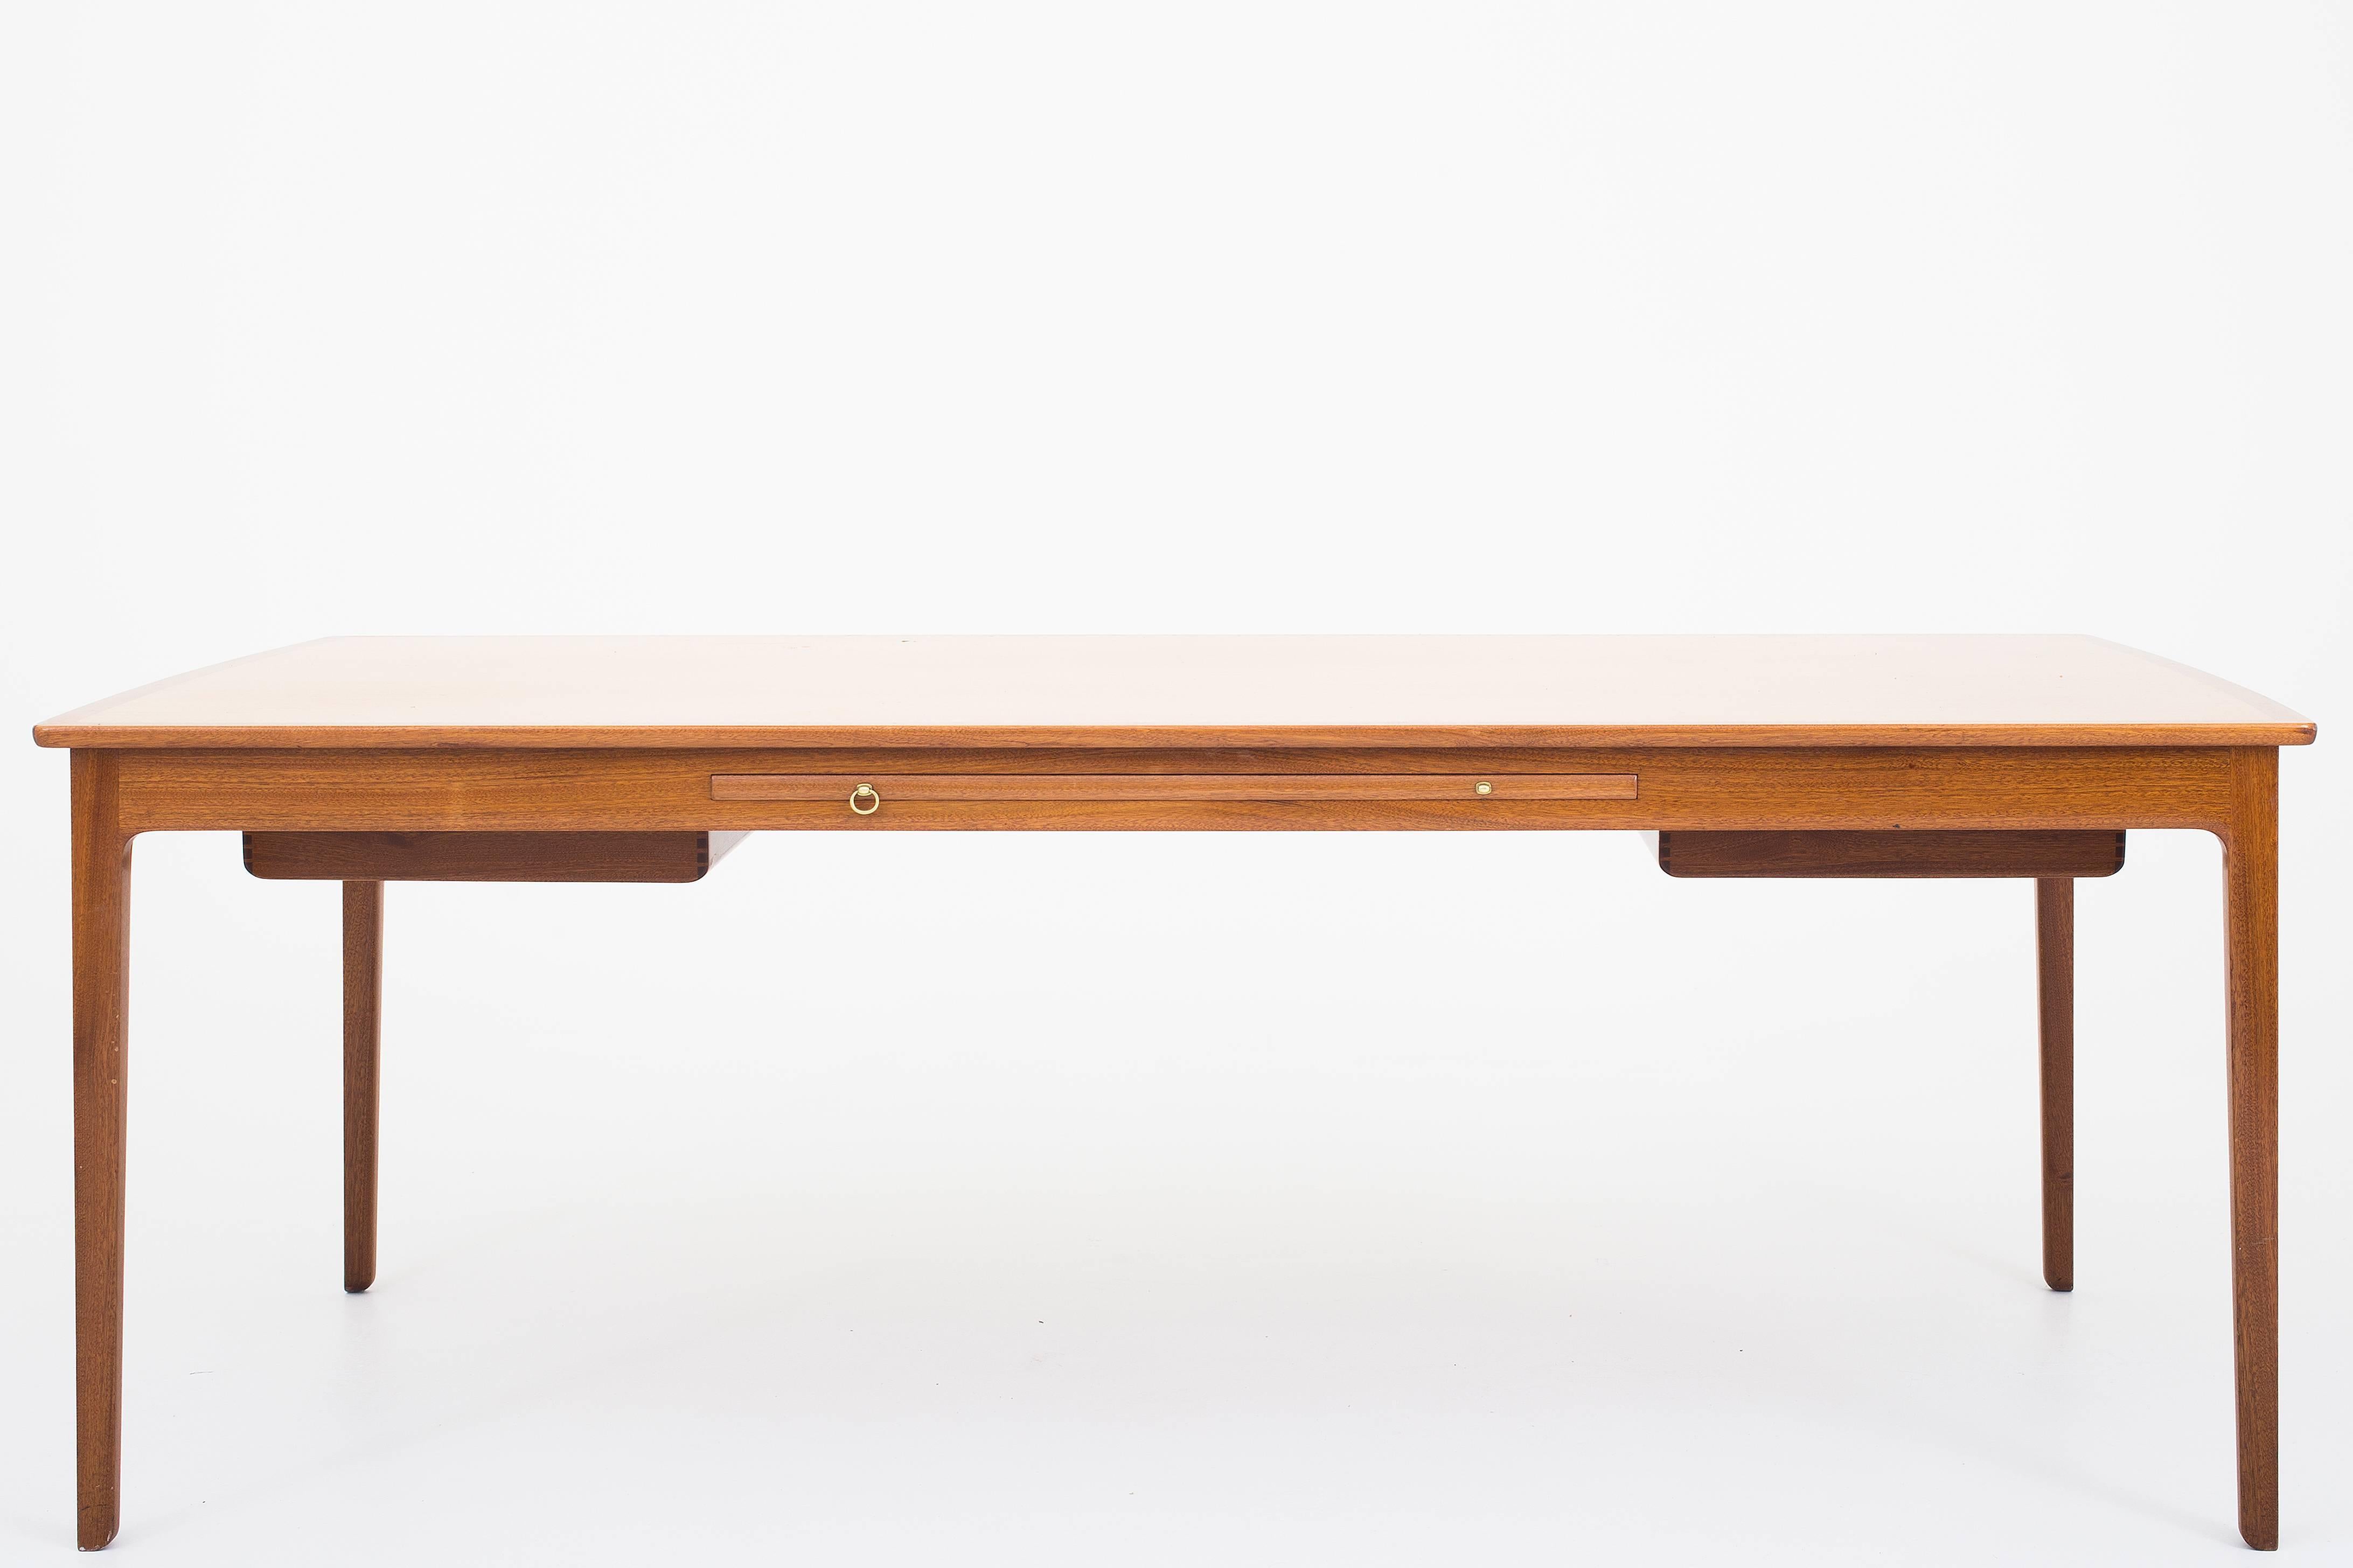 Freestanding desk in mahogany by Ole Wanscher. Front with two drawers.
Maker A.J. Iversen.